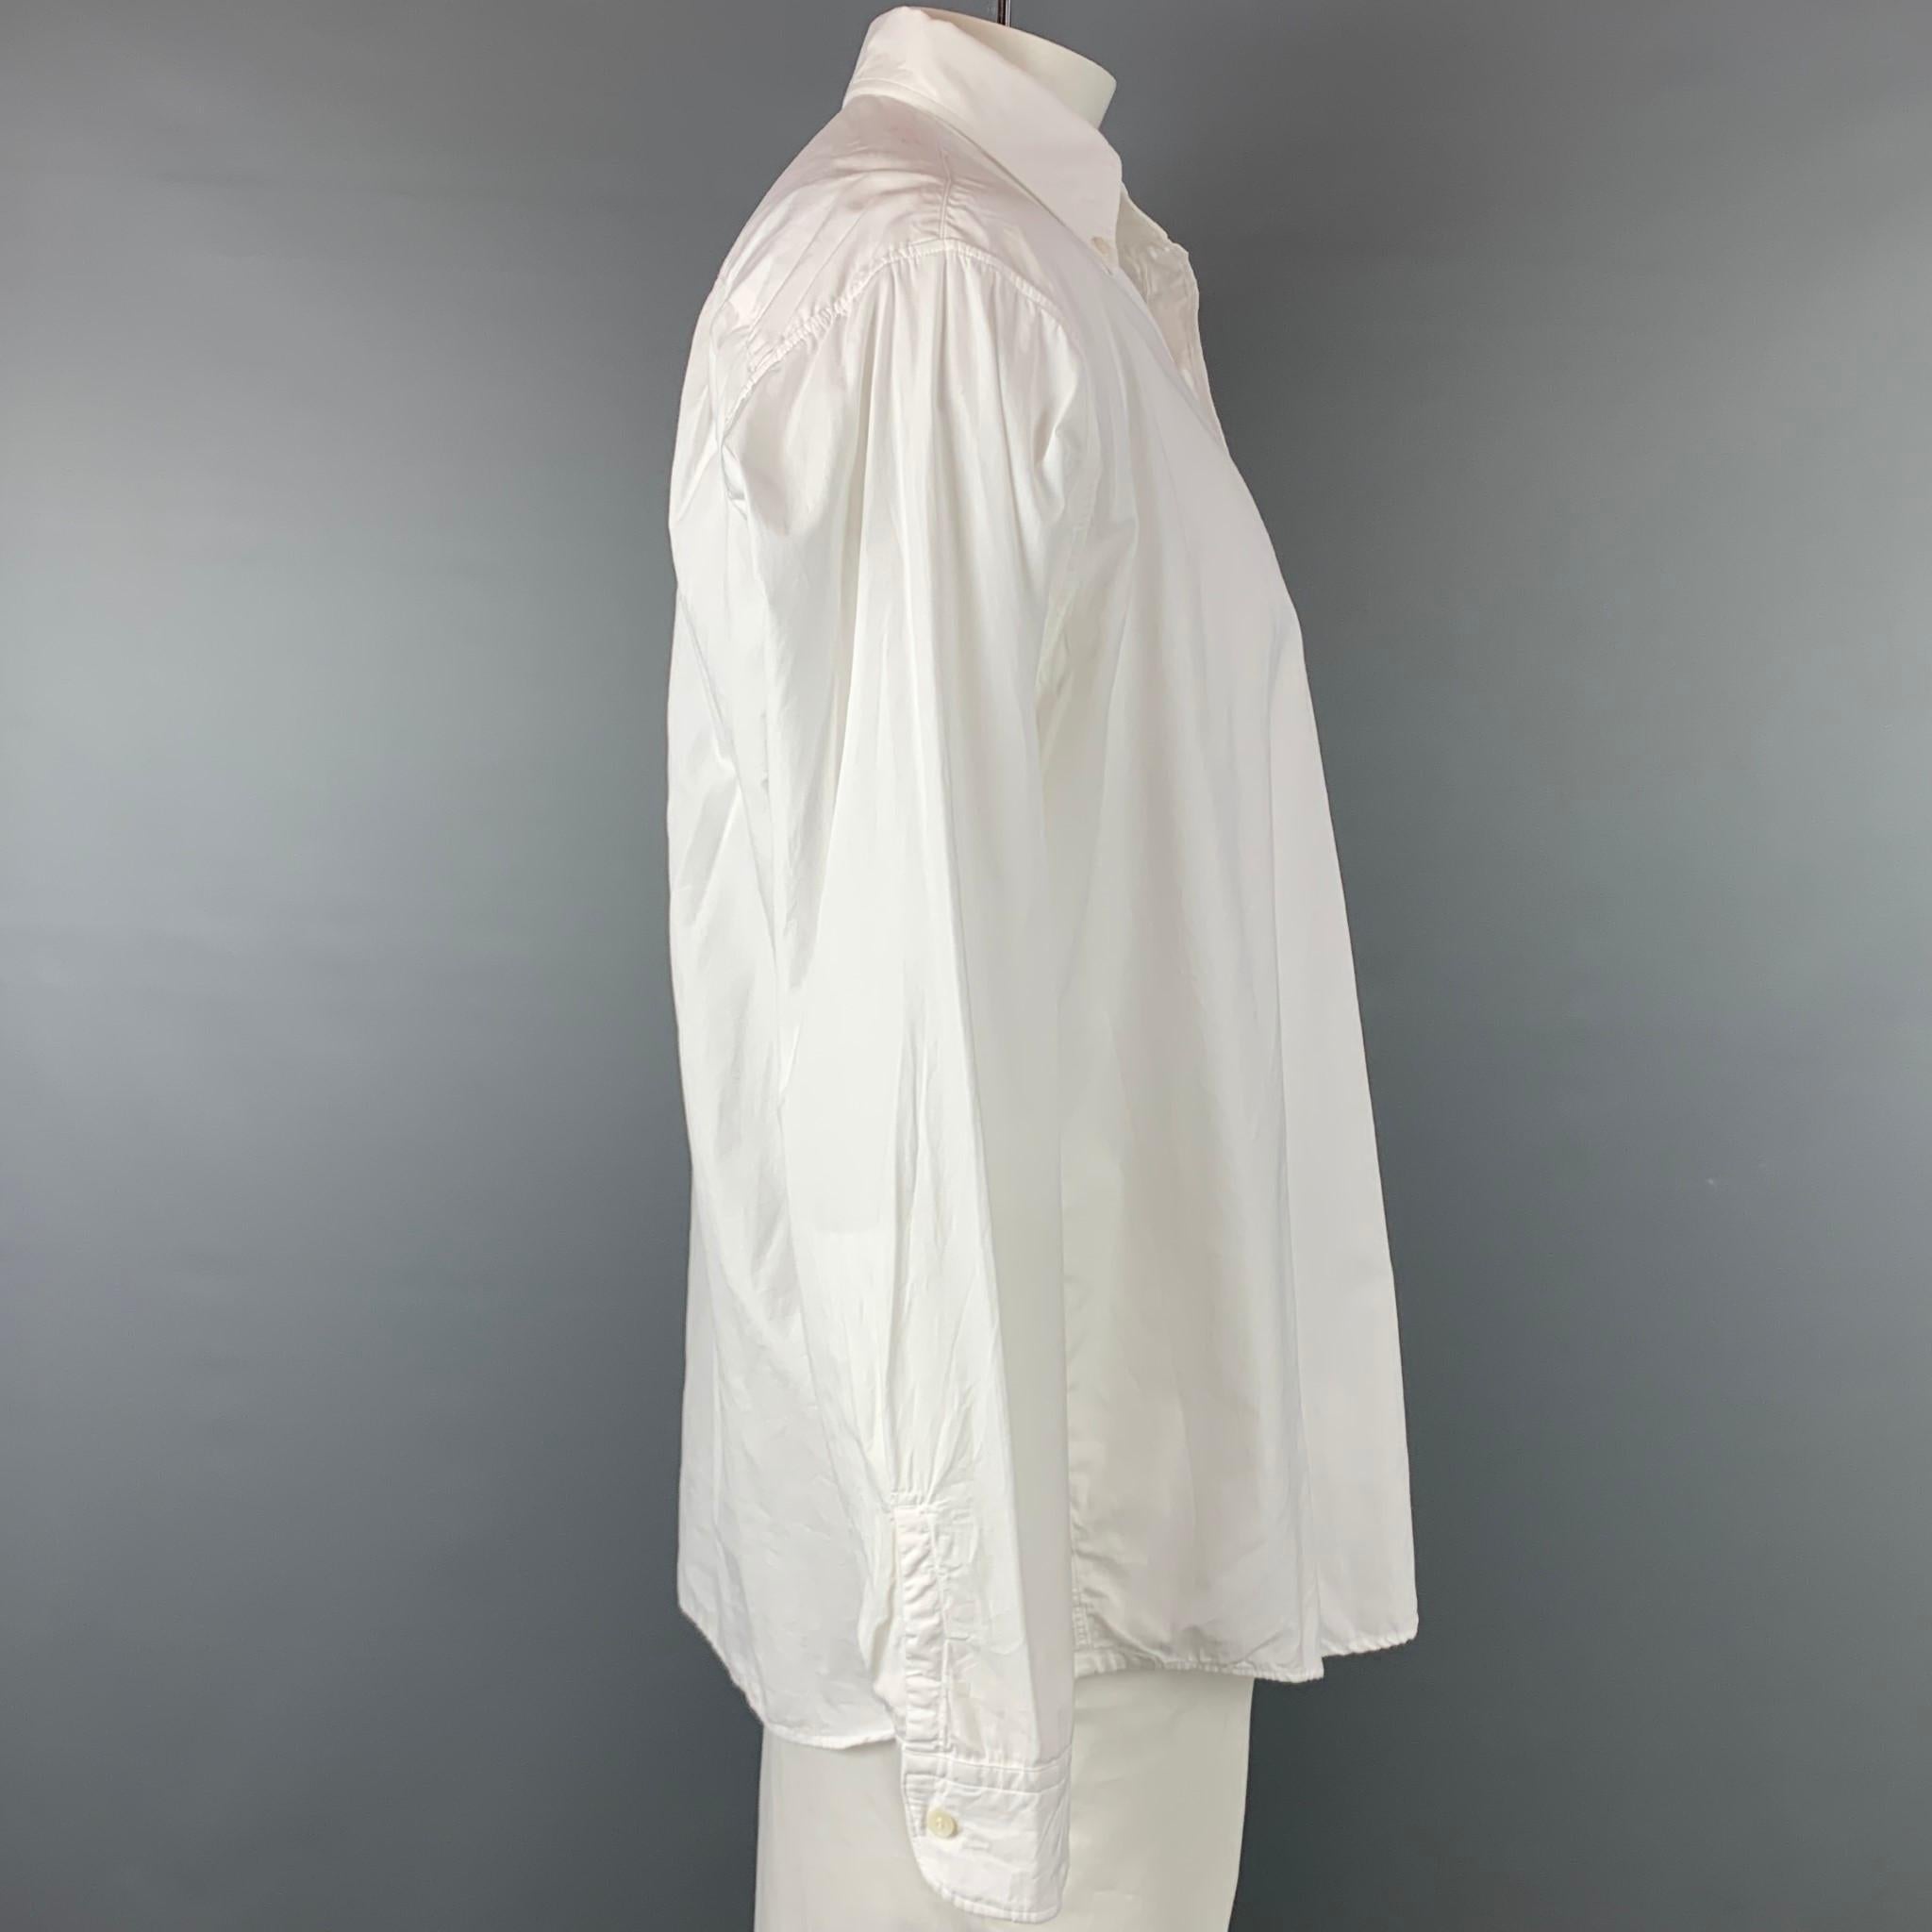 45rpm long sleeve shirt comes in a white cotton featuring a button down style, top stitching, and a front pocket. Made in Japan.

New With Tags.
Marked: JP 5
Original Retail Price: $636.00

Measurements:

Shoulder: 21 in.
Chest: 52 in.
Sleeve: 26